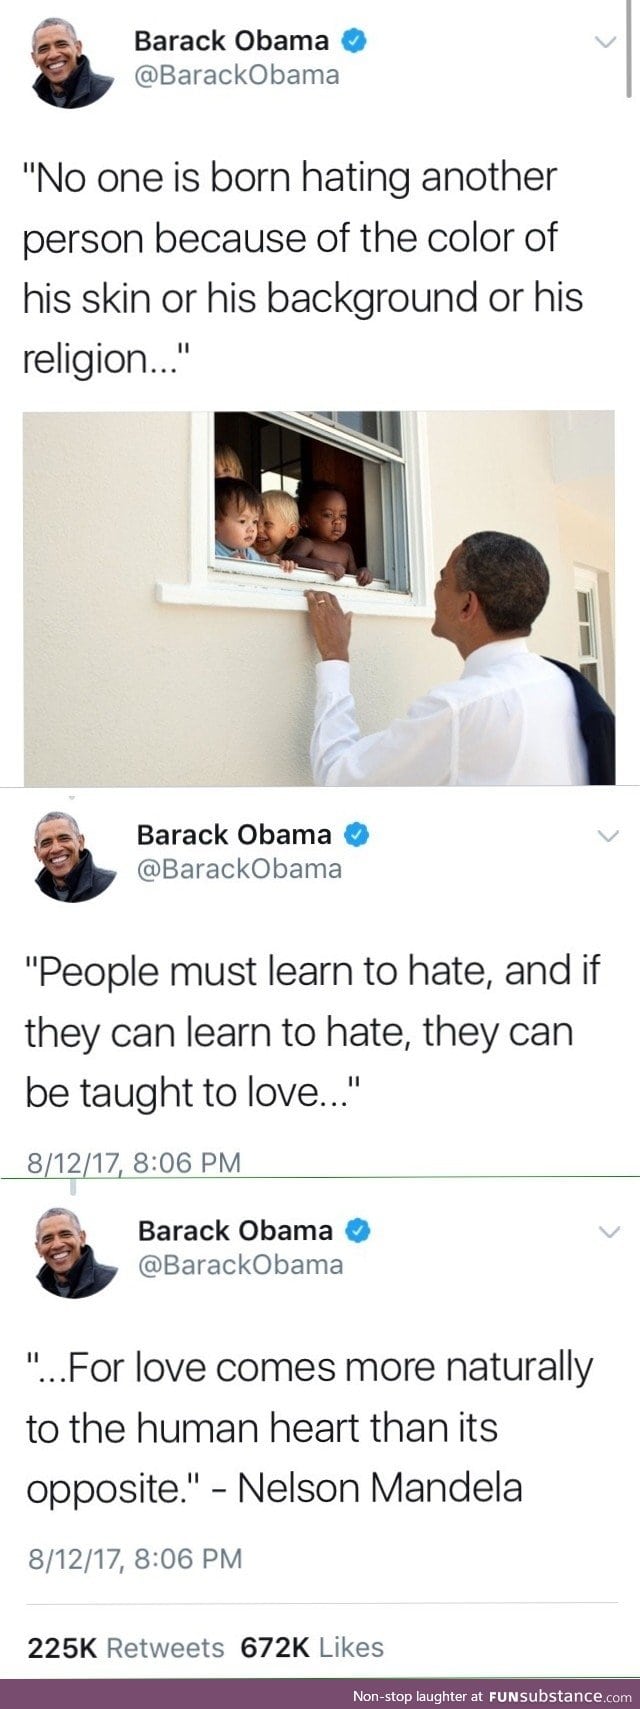 If they can learn to hate